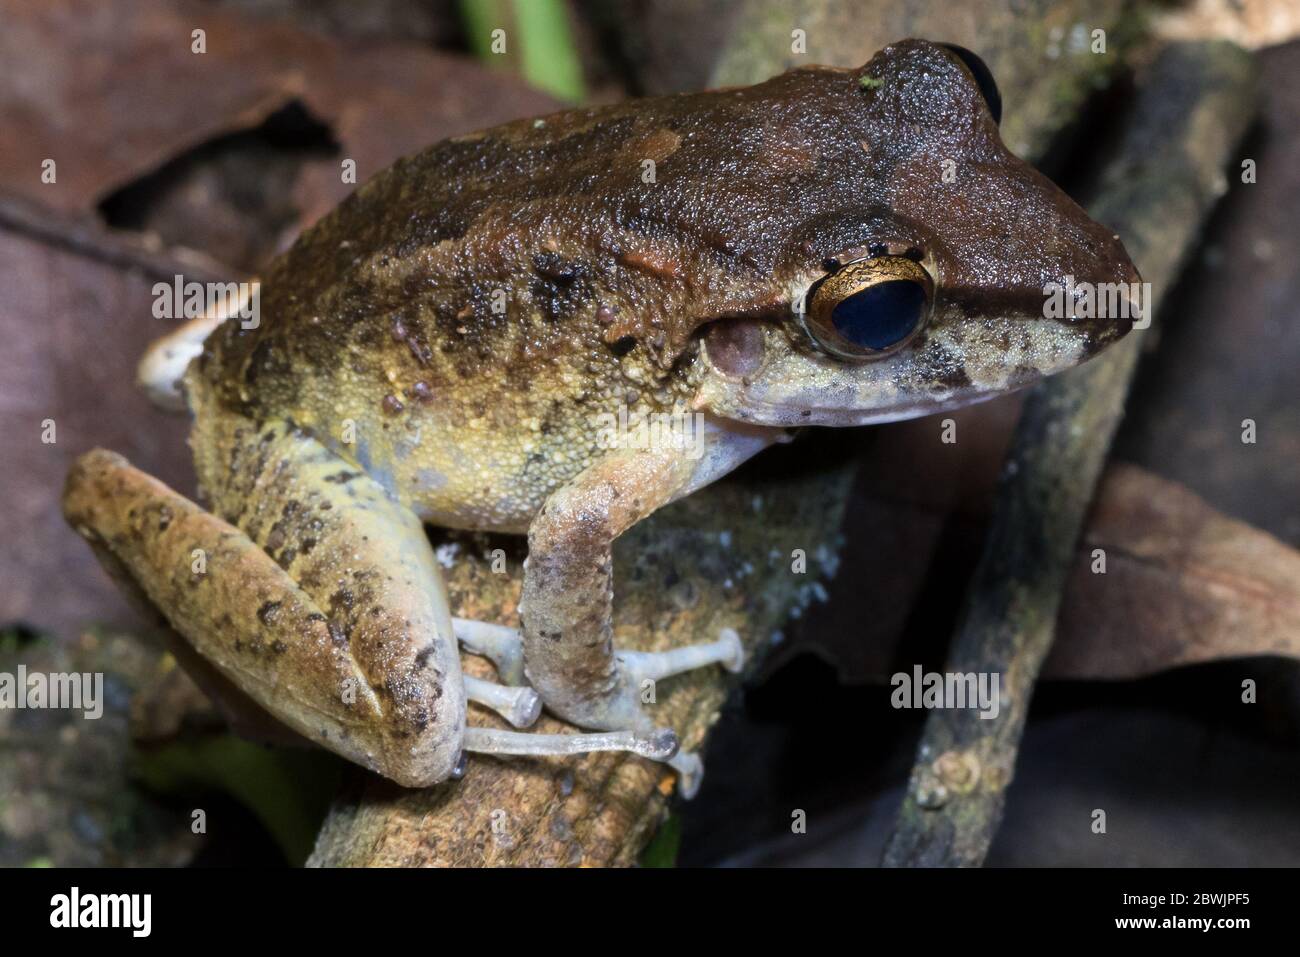 Panamanian Cross-banded Tree Frog - Smilisca sila. Nocturnal frog photographed at Tortuguero, Costa Rica. Stock Photo